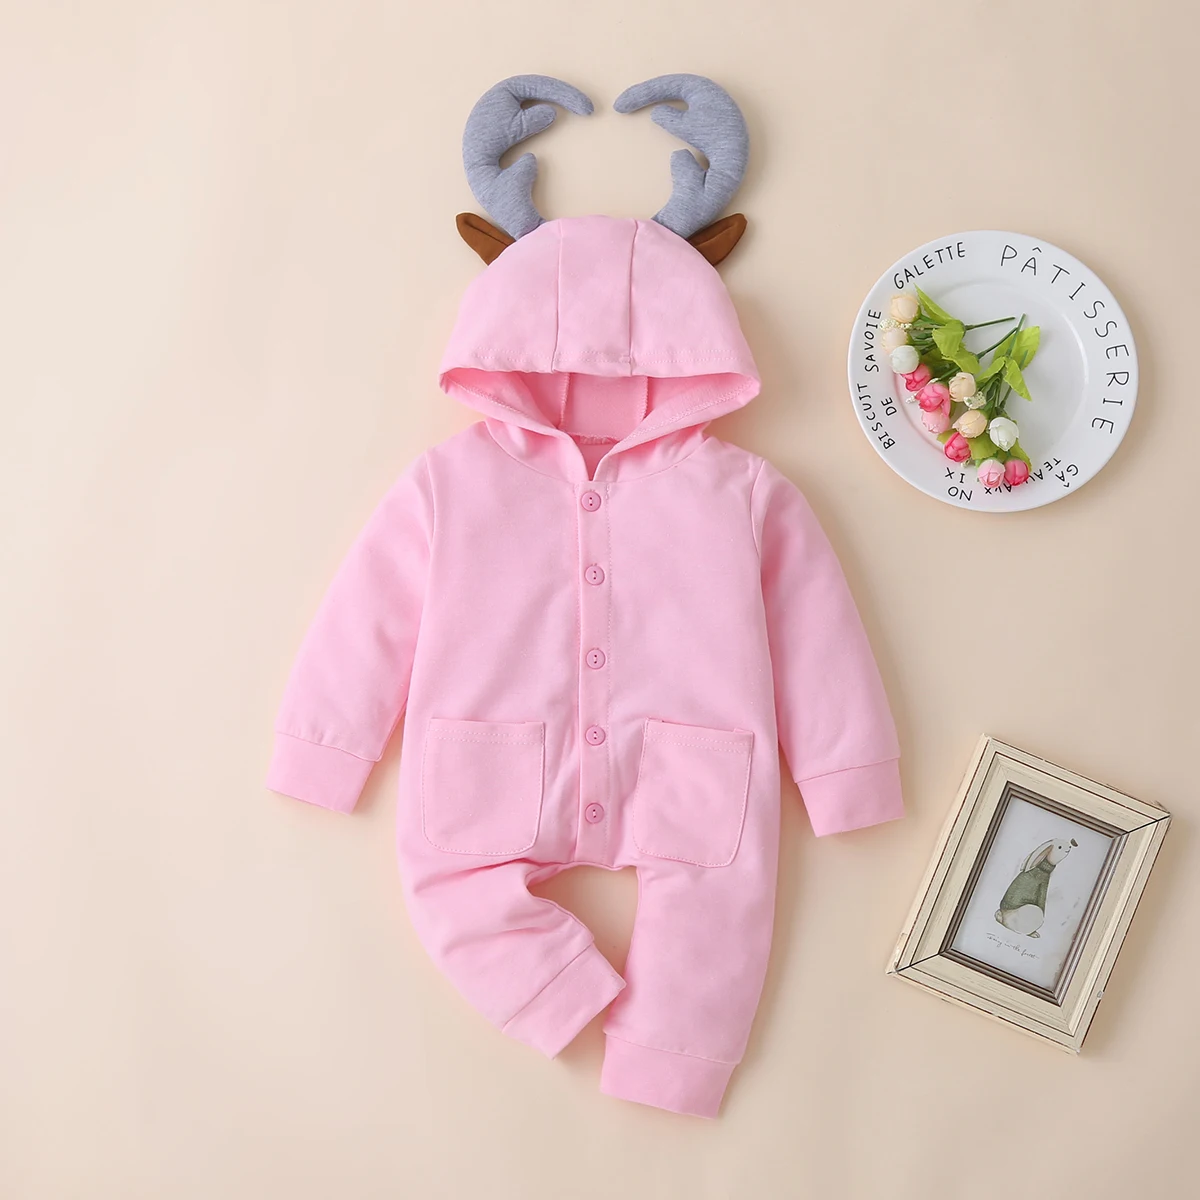 

New Baby Toddler Infant Newborn Baby Boy Clothing Romper Long Sleeve Solid 3D Deer Ears Jumpsuit Playsuit Clothes Outfits 0-24M